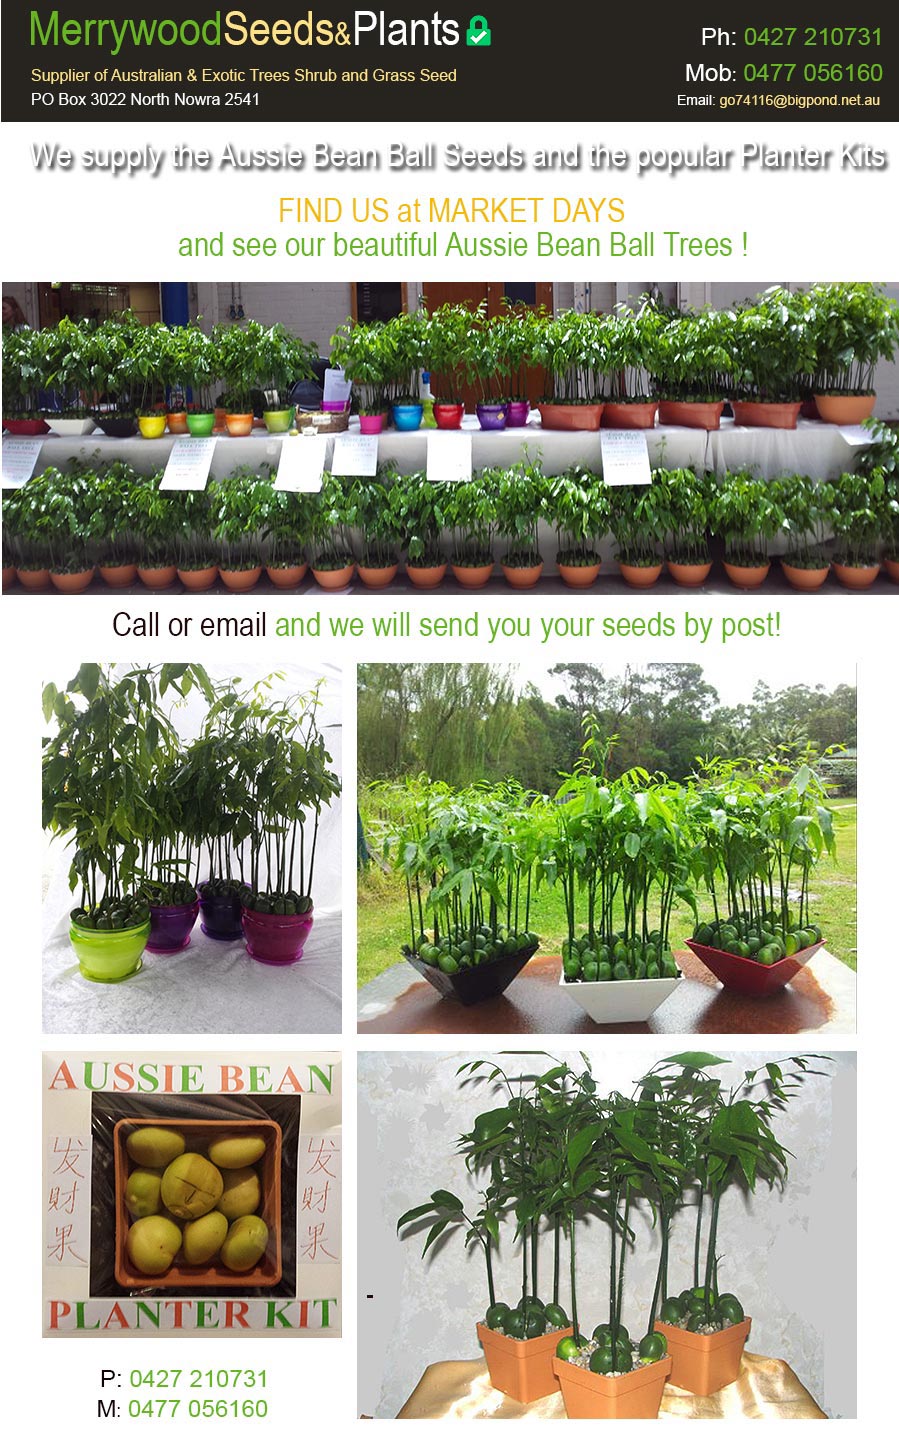 Merrywood Seeds and Plants 